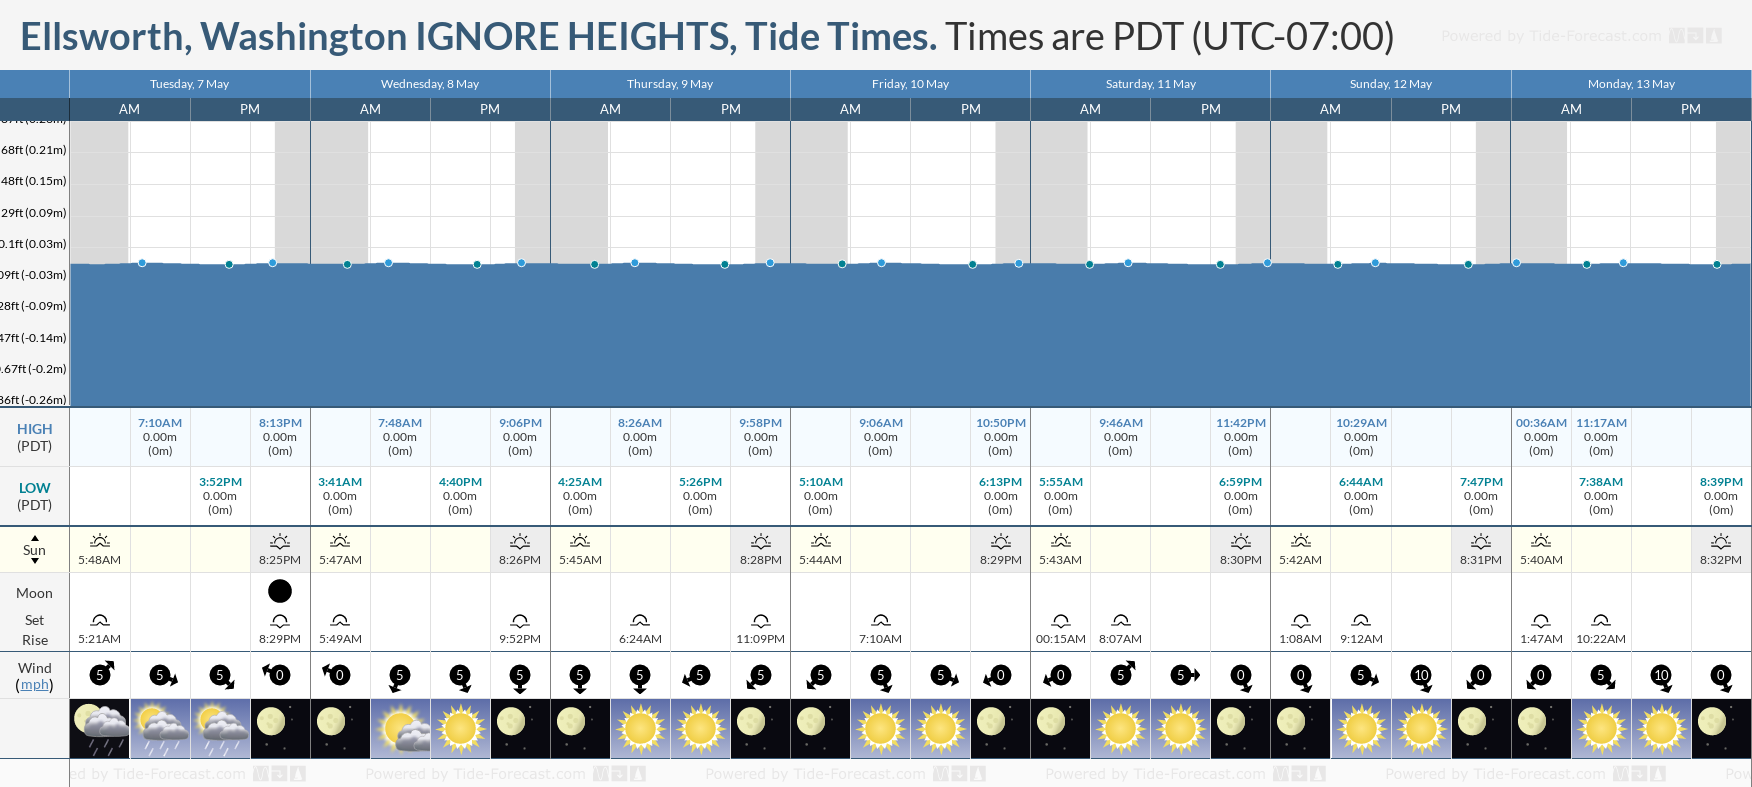 Ellsworth, Washington IGNORE HEIGHTS Tide Chart including high and low tide times for the next 7 days